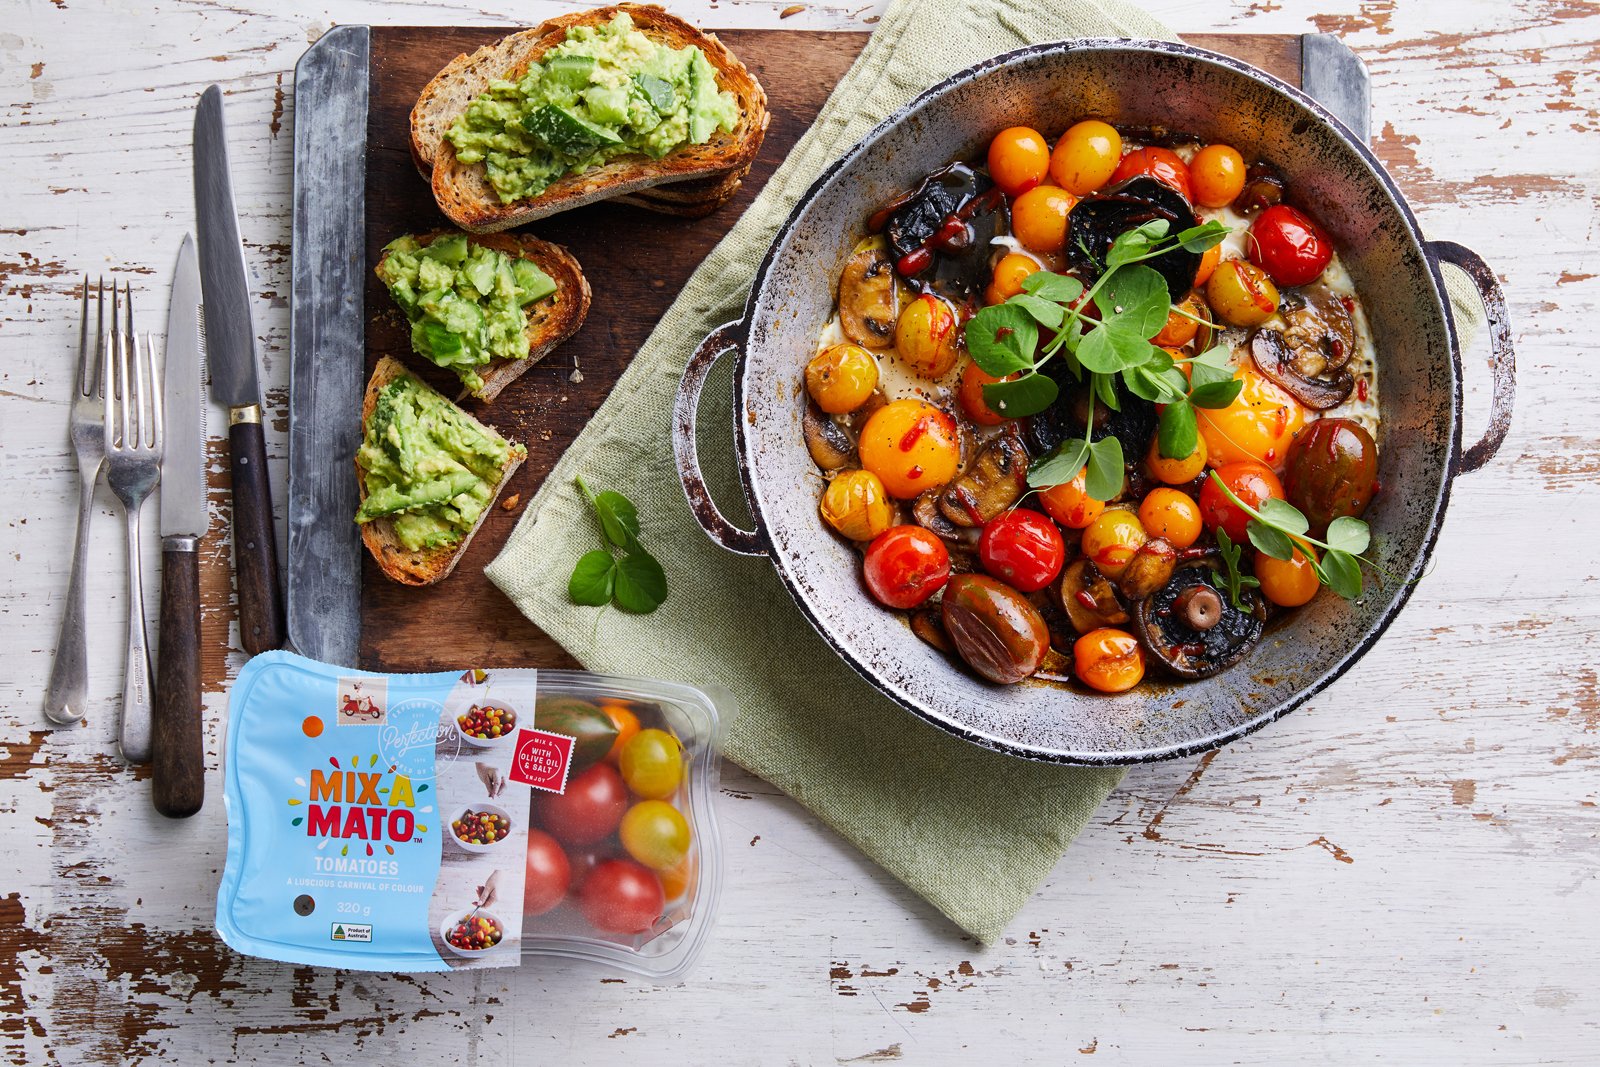 Recipe Mixamato Tomato All Day Breakfast by Perfection Fresh